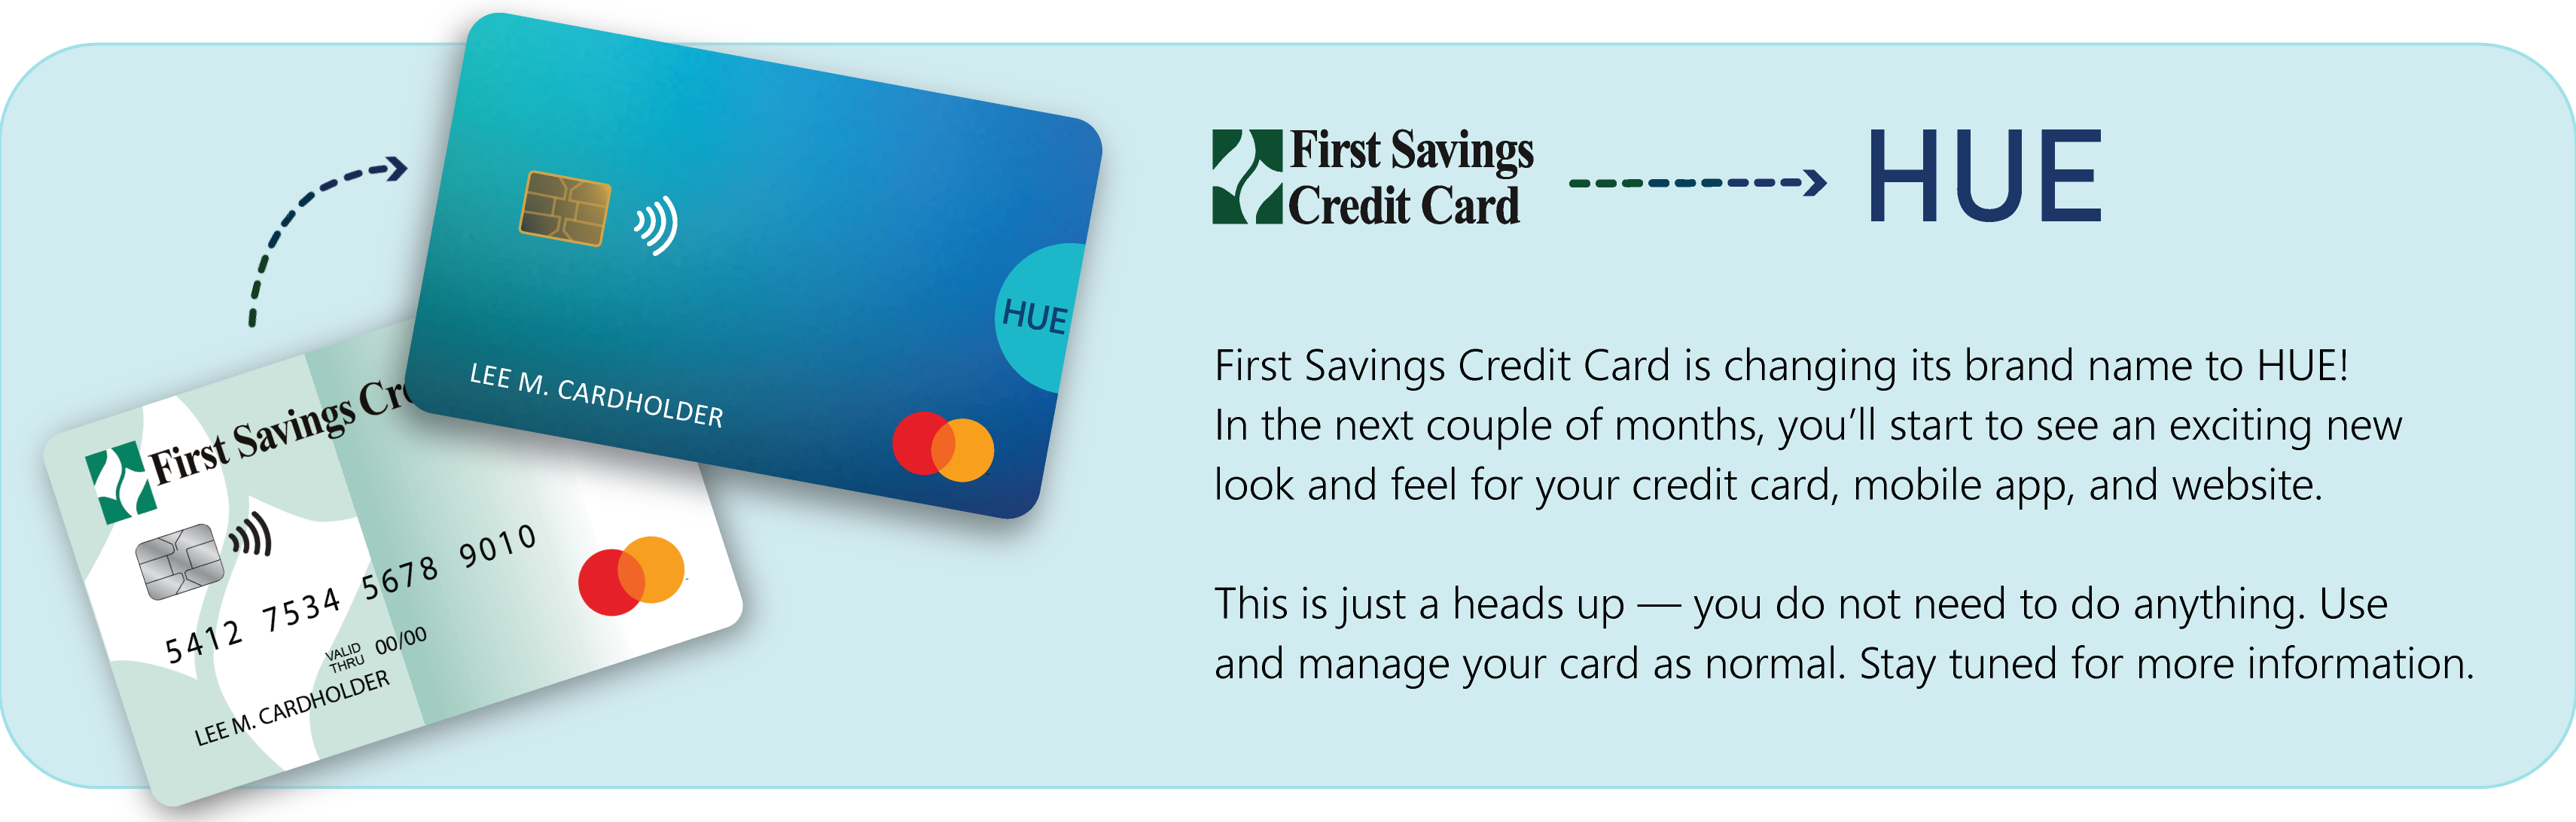 Picture of First Savings Credit Card changing to HUE Credit Card.
            New to HUE?  Checkout firstsavingscc.com/huewelcome to learn more.  List of two bullet points.  Bullet Point 1.  No need to do anything, continue to use your credit card like normal.  Bullet Point 2.  You will be issued a new HUE card when your First Savings Credit Card expires.
 
            List of three informational messages.
 
            Message One.  Account Settings.  Log in or register your online account with your First Savings Credit Card information.
 
            Message Two.  Payment details.  Scheduled or pending payments will continue as normal.
 
            Message Three.  Preferences.  Account preferences (text and email alerts, paperless statements, and autopay) will stay the same.